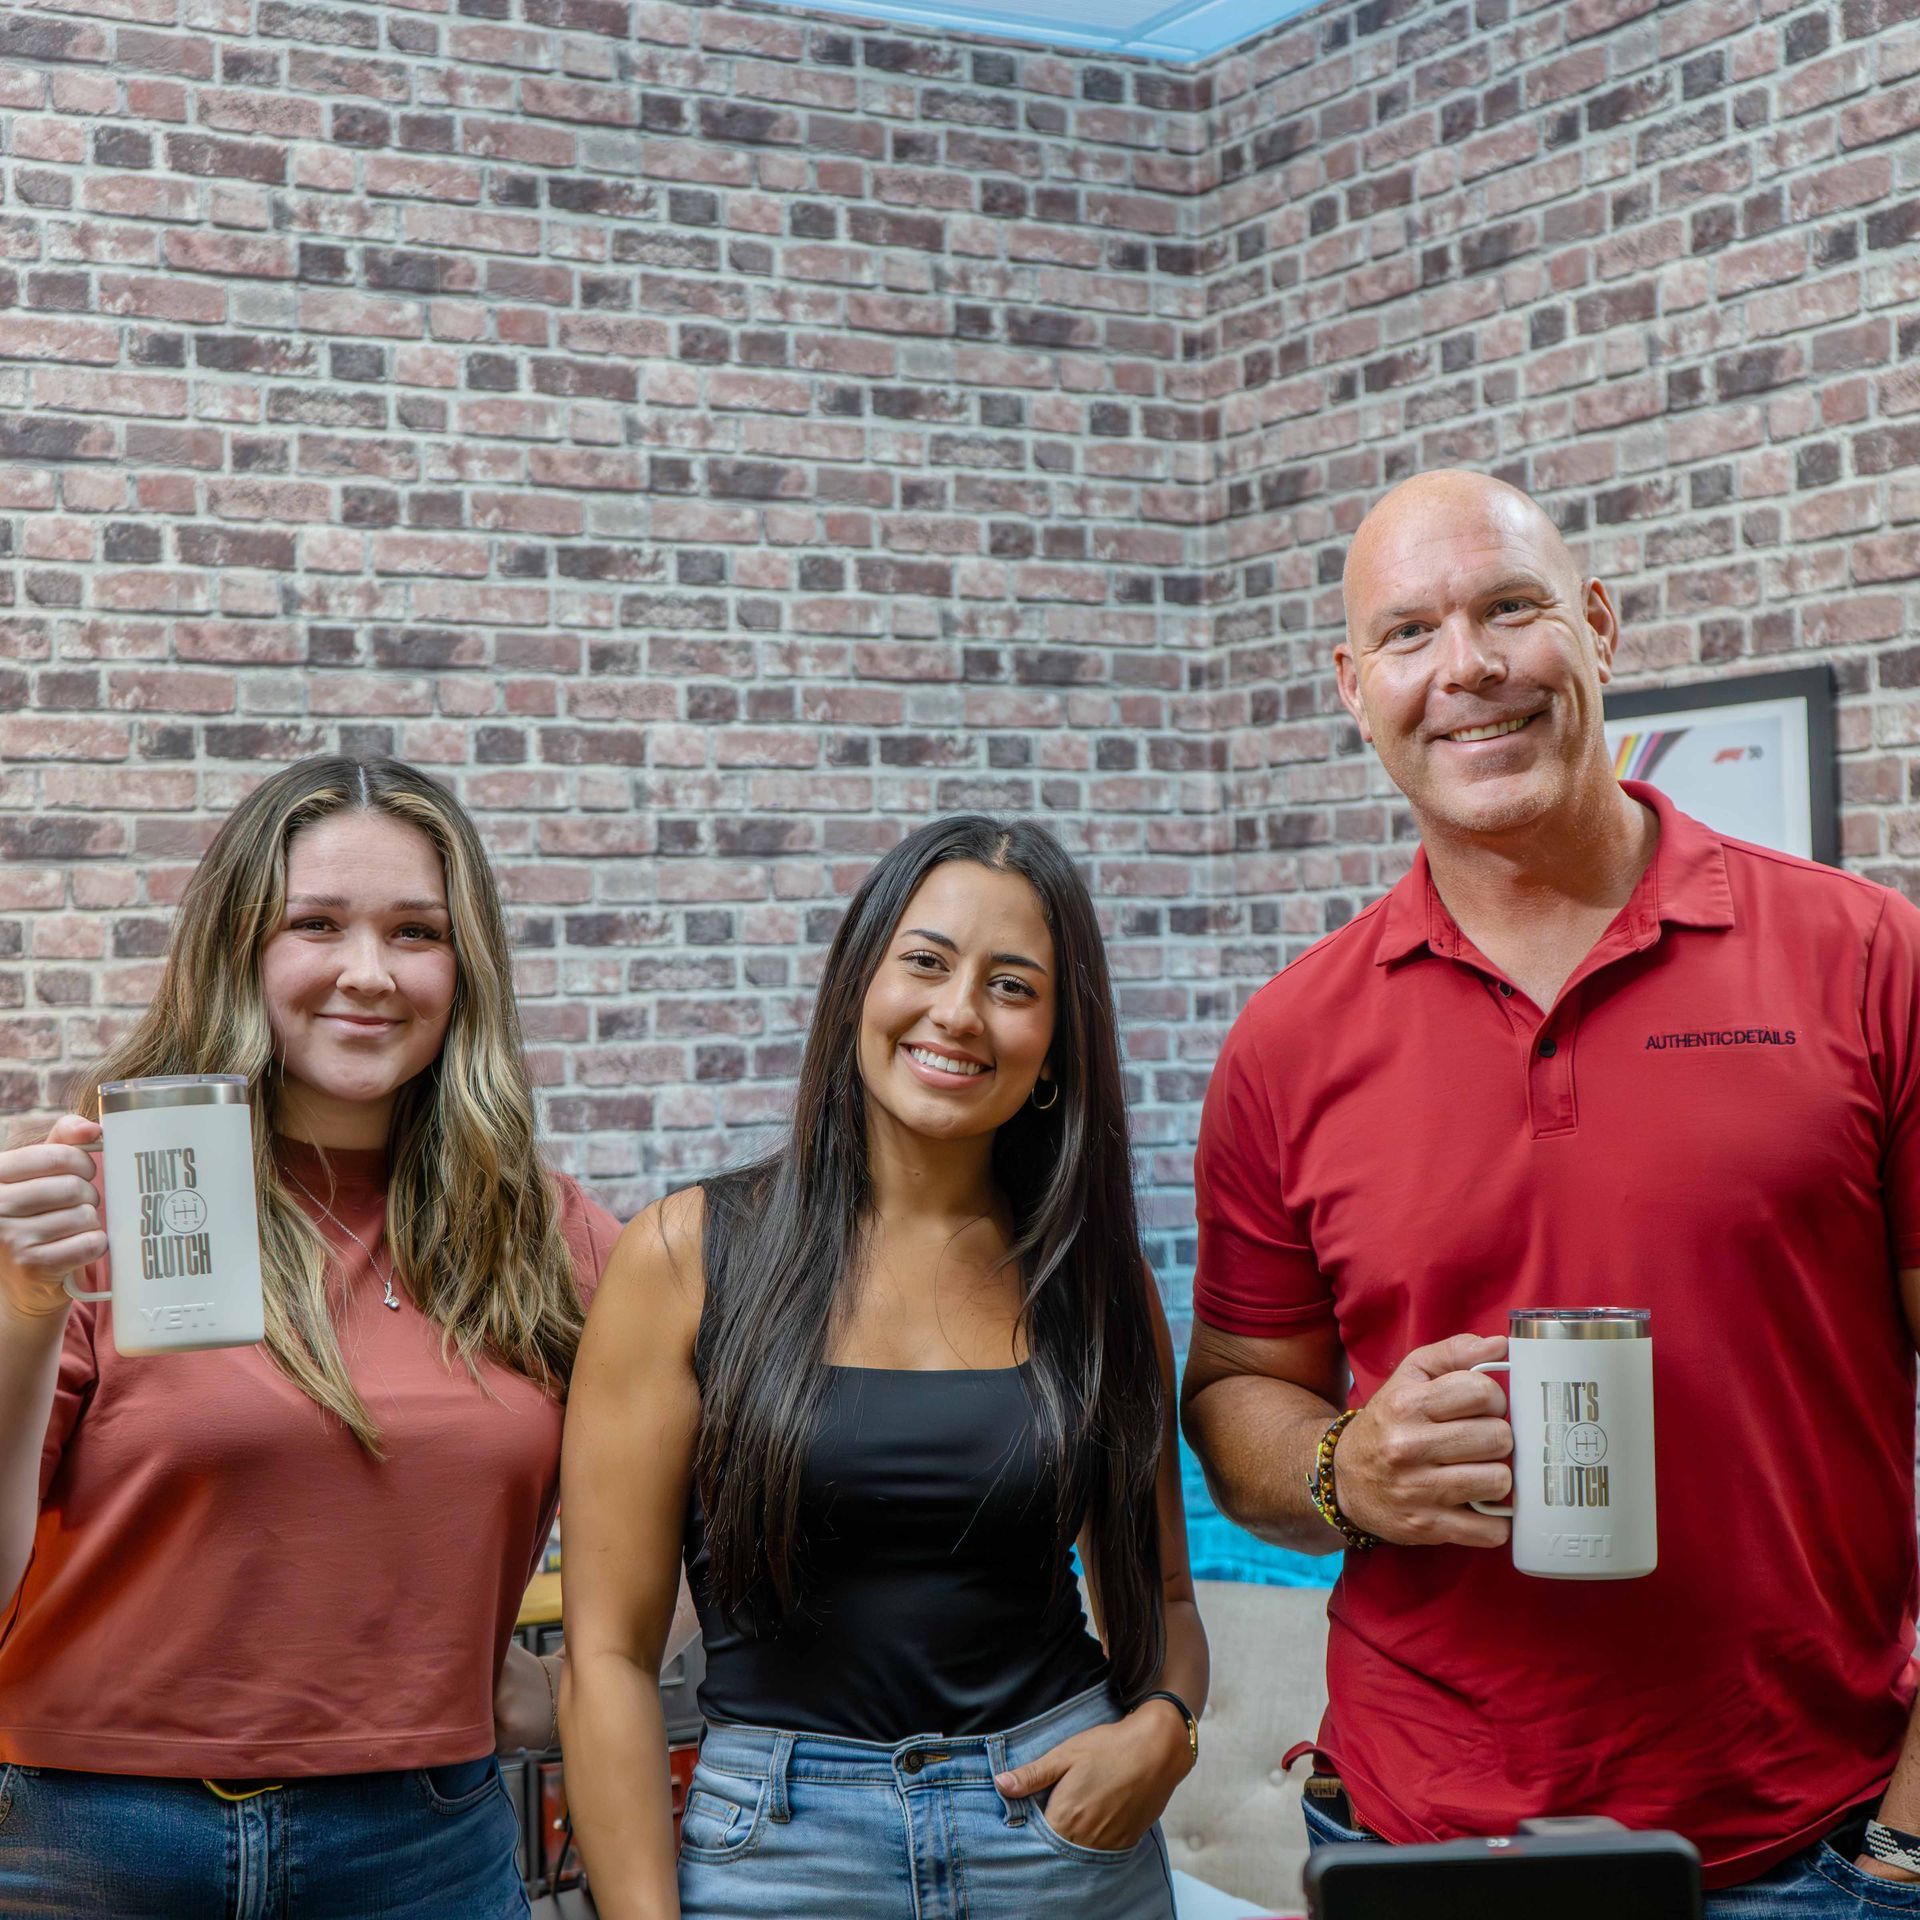 A man and two women are standing next to each other holding coffee mugs in front of a brick wall.